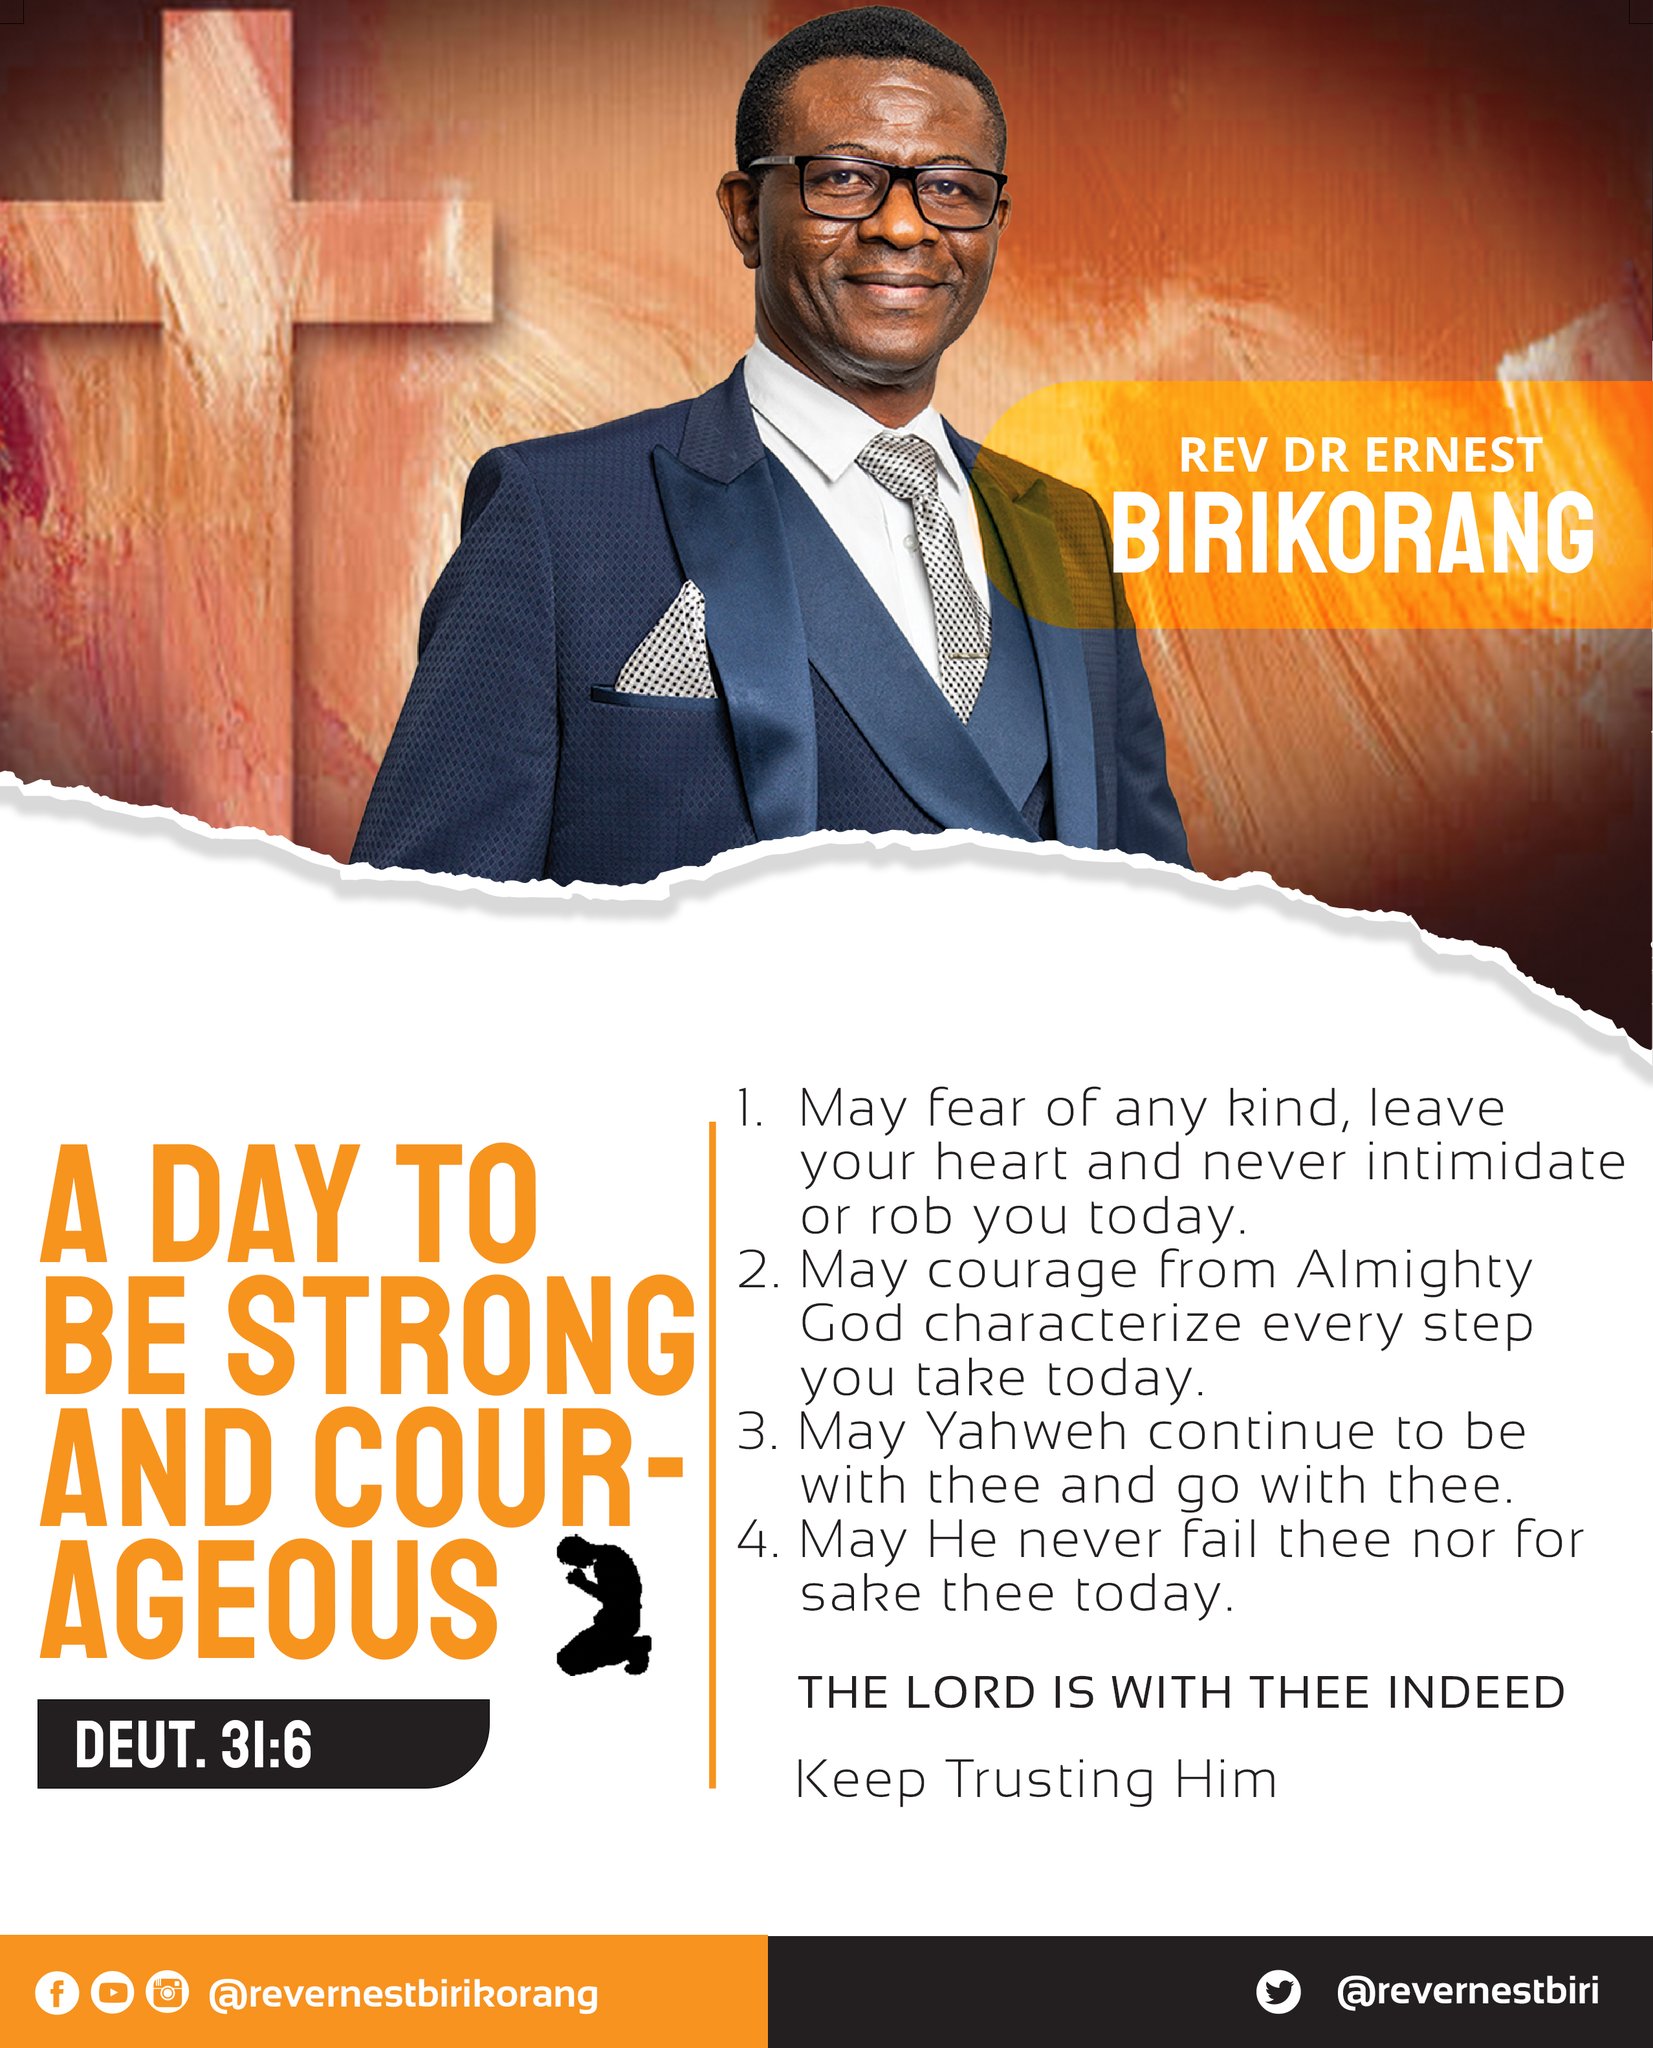 REV DR ERNEST BIRIKORANC May fear of any kind, leave your heart and never intimidate A DAY TO or rob You today. 2. May courage from Almighty BE STRONG] God characterize every step You take today. 3. May Yahweh continue t0 be ANd COUR- with thee and 931v with thee 4,May He never thee nor for AGEOUS sake thee today. THE LORD IS WITH THEE INDEED DEUT. 31.6 Keep Trusting Him 00 0 @revernestbirikorang @revernestbiri